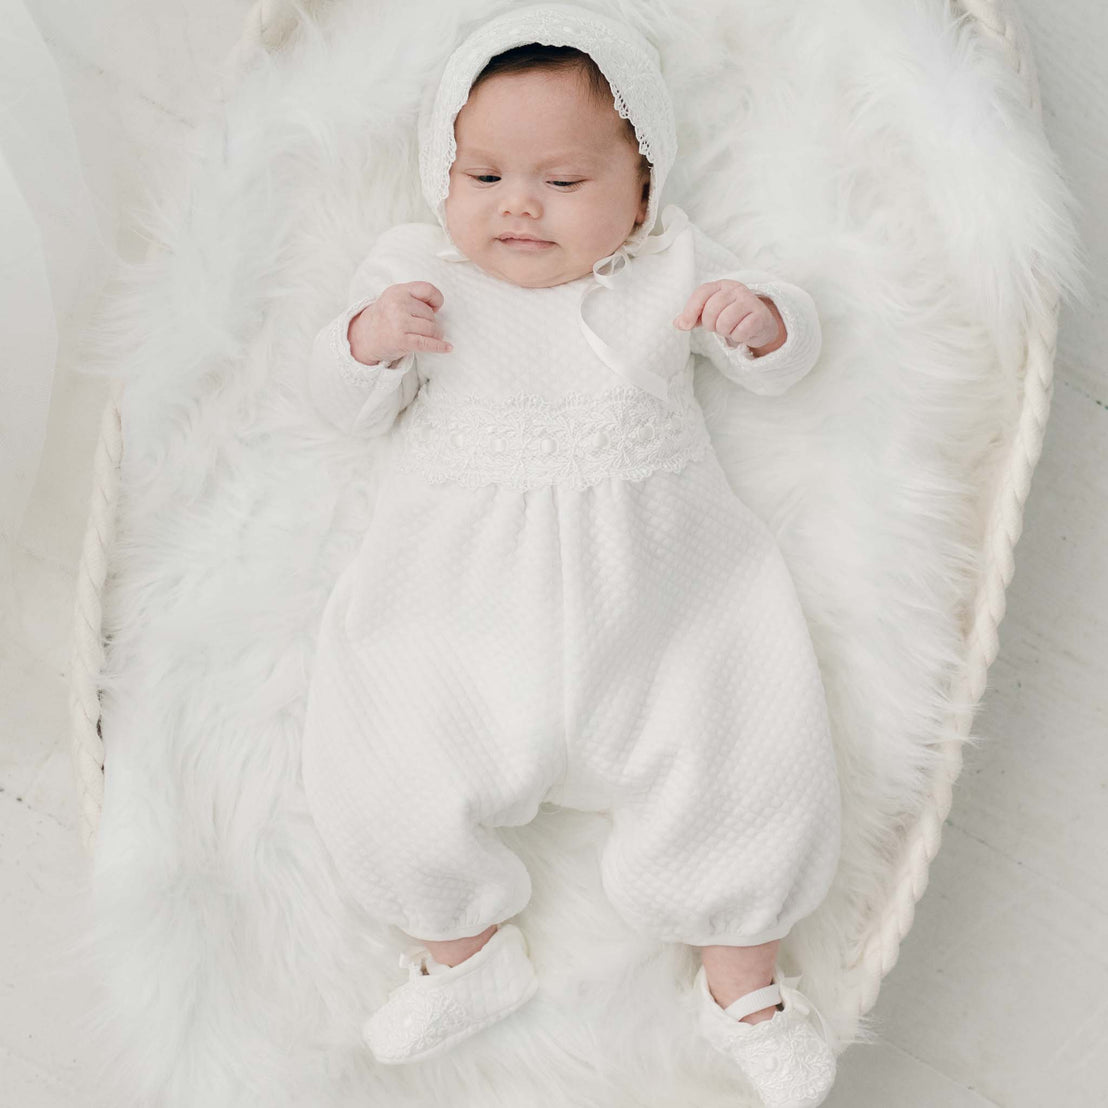 A newborn baby dressed in a Madeline Quilted Newborn Romper with lace details, lying on a soft white fur blanket, gazing gently upward.